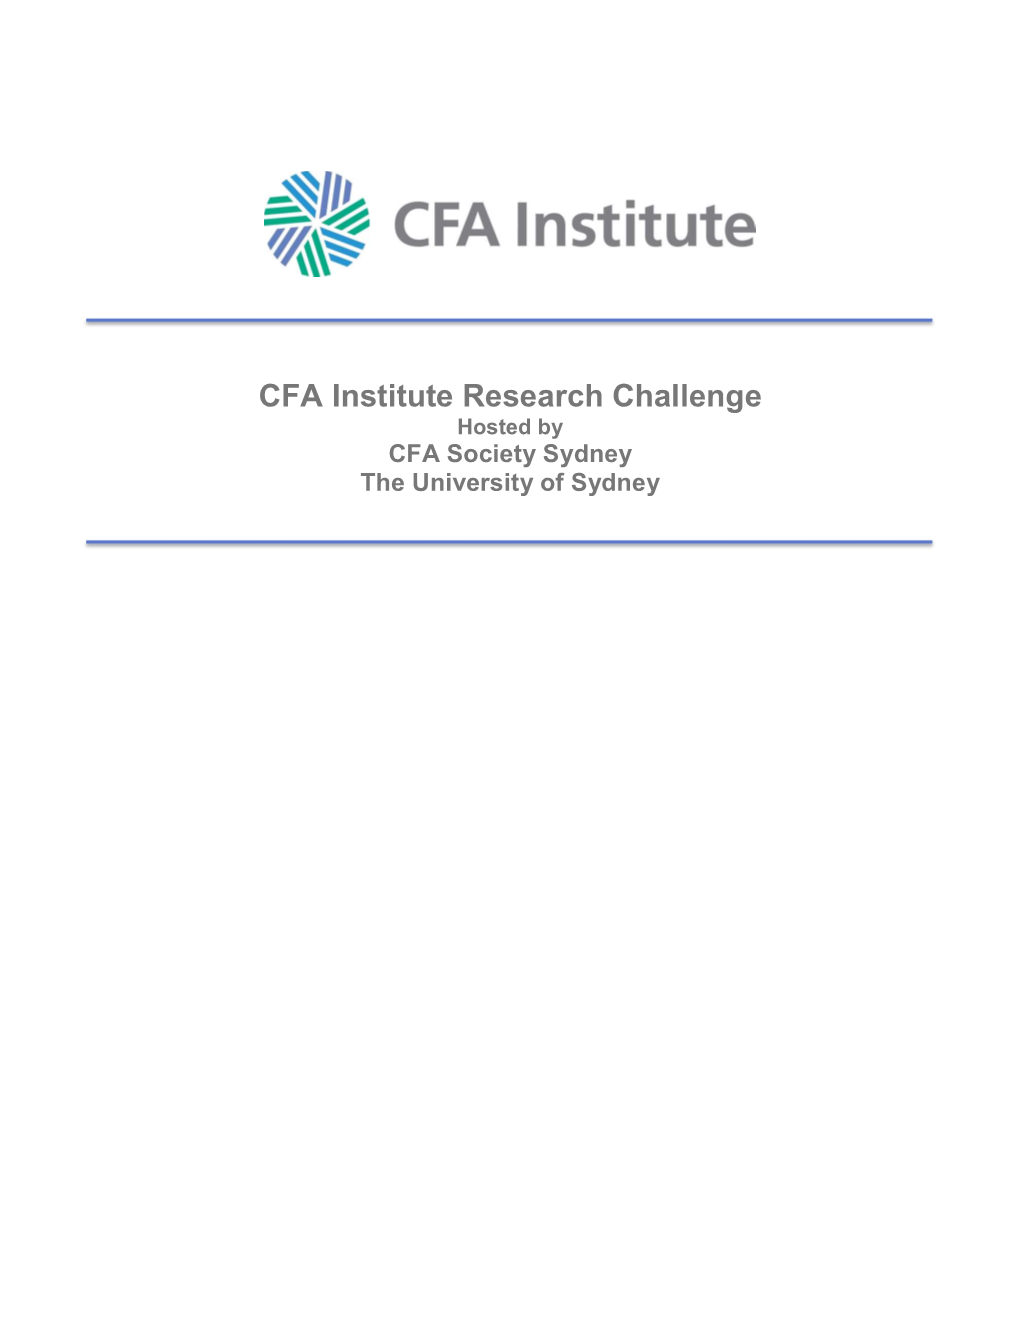 CFA Institute Research Challenge Hosted by CFA Society Sydney the University of Sydney